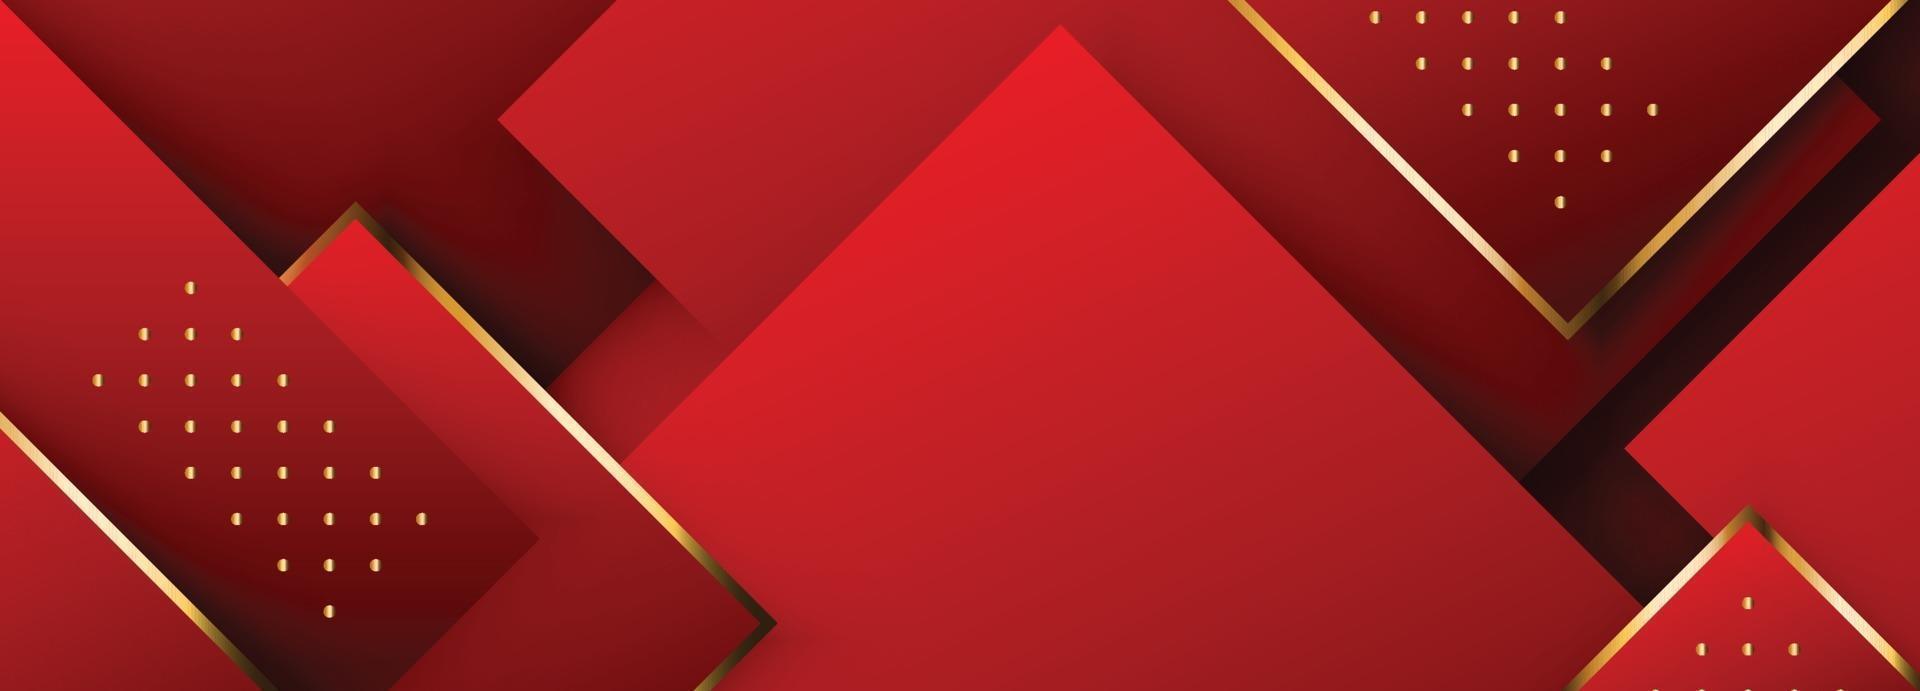 Red and Gold Rectangle Long Banner Design vector